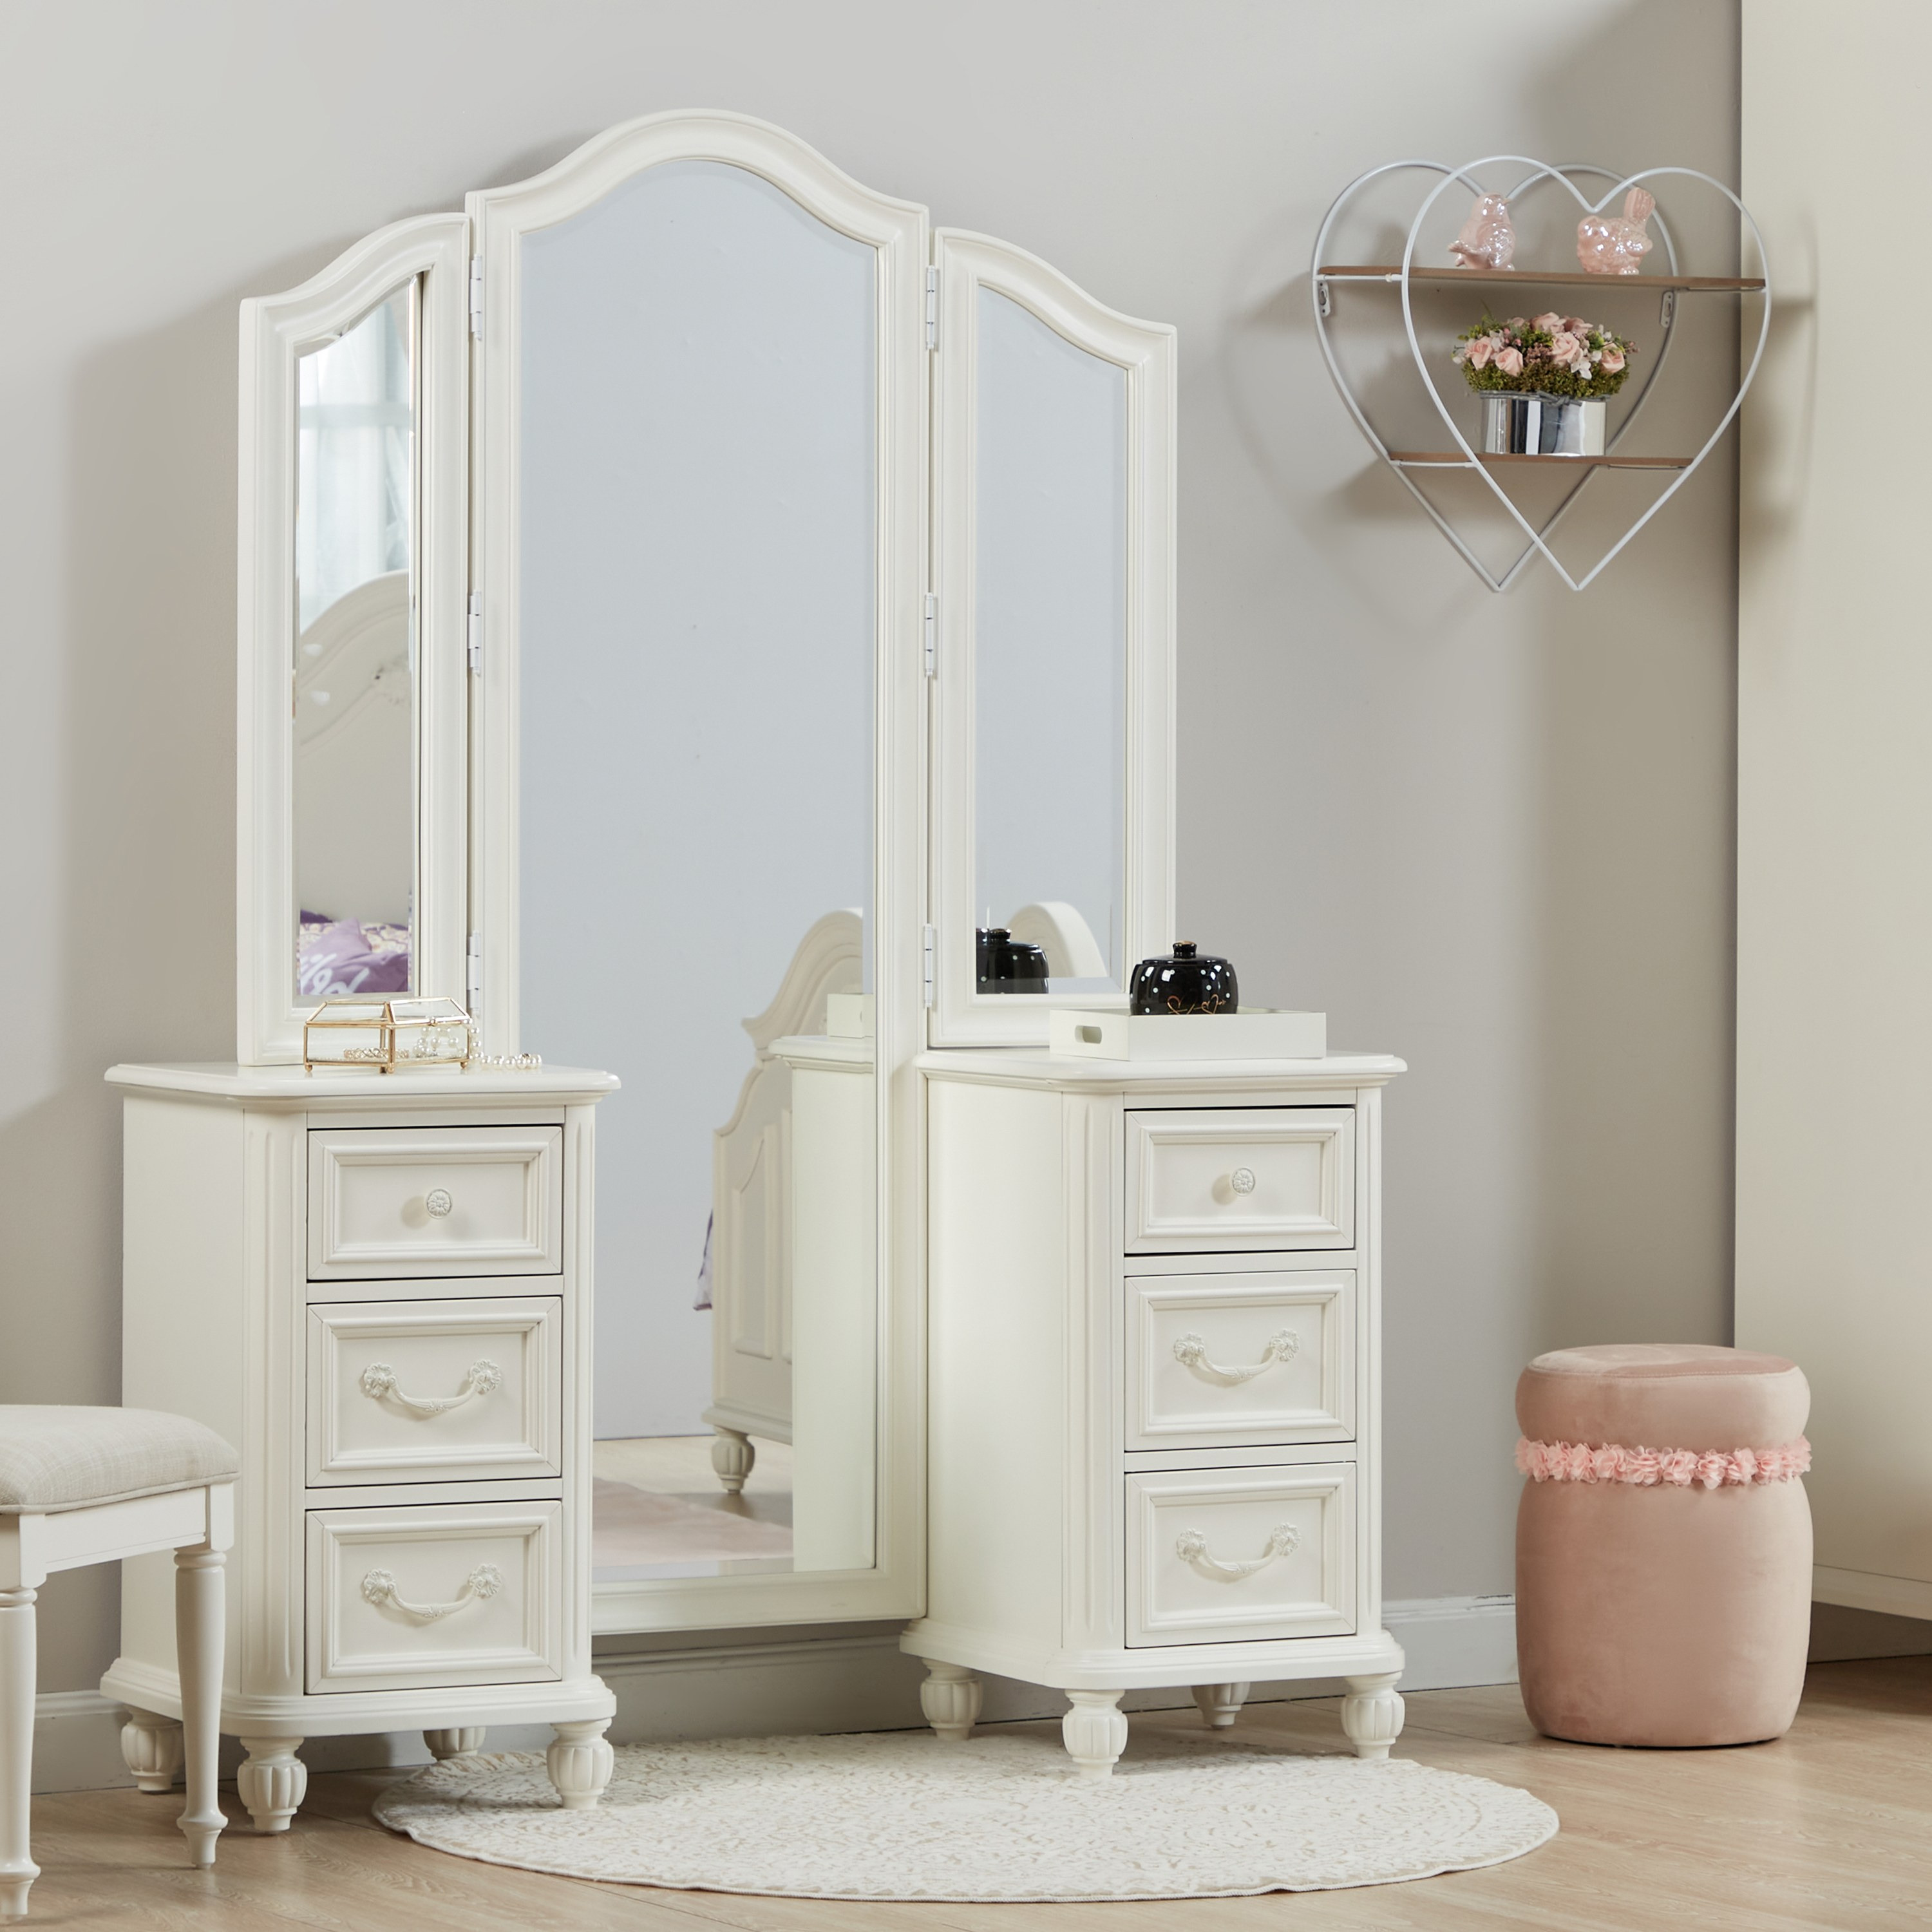 Bedside Table Full Length Mirror Dressing Table Drawers Storage Cabinet  White | eBay